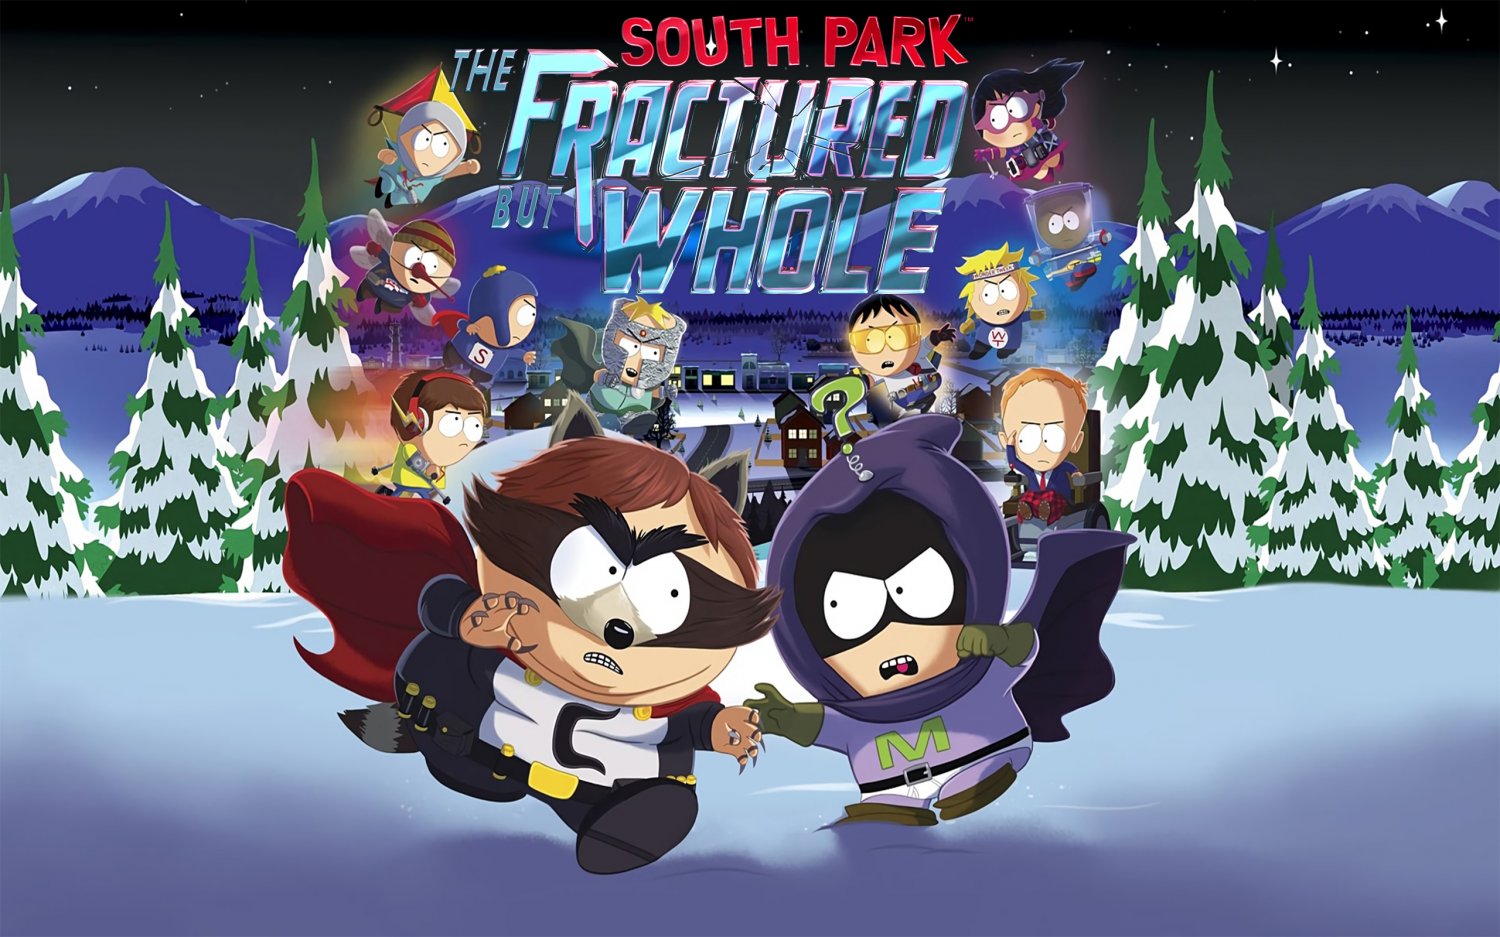 South Park The Fractured But Whole   18"x28" (45cm/70cm) Poster